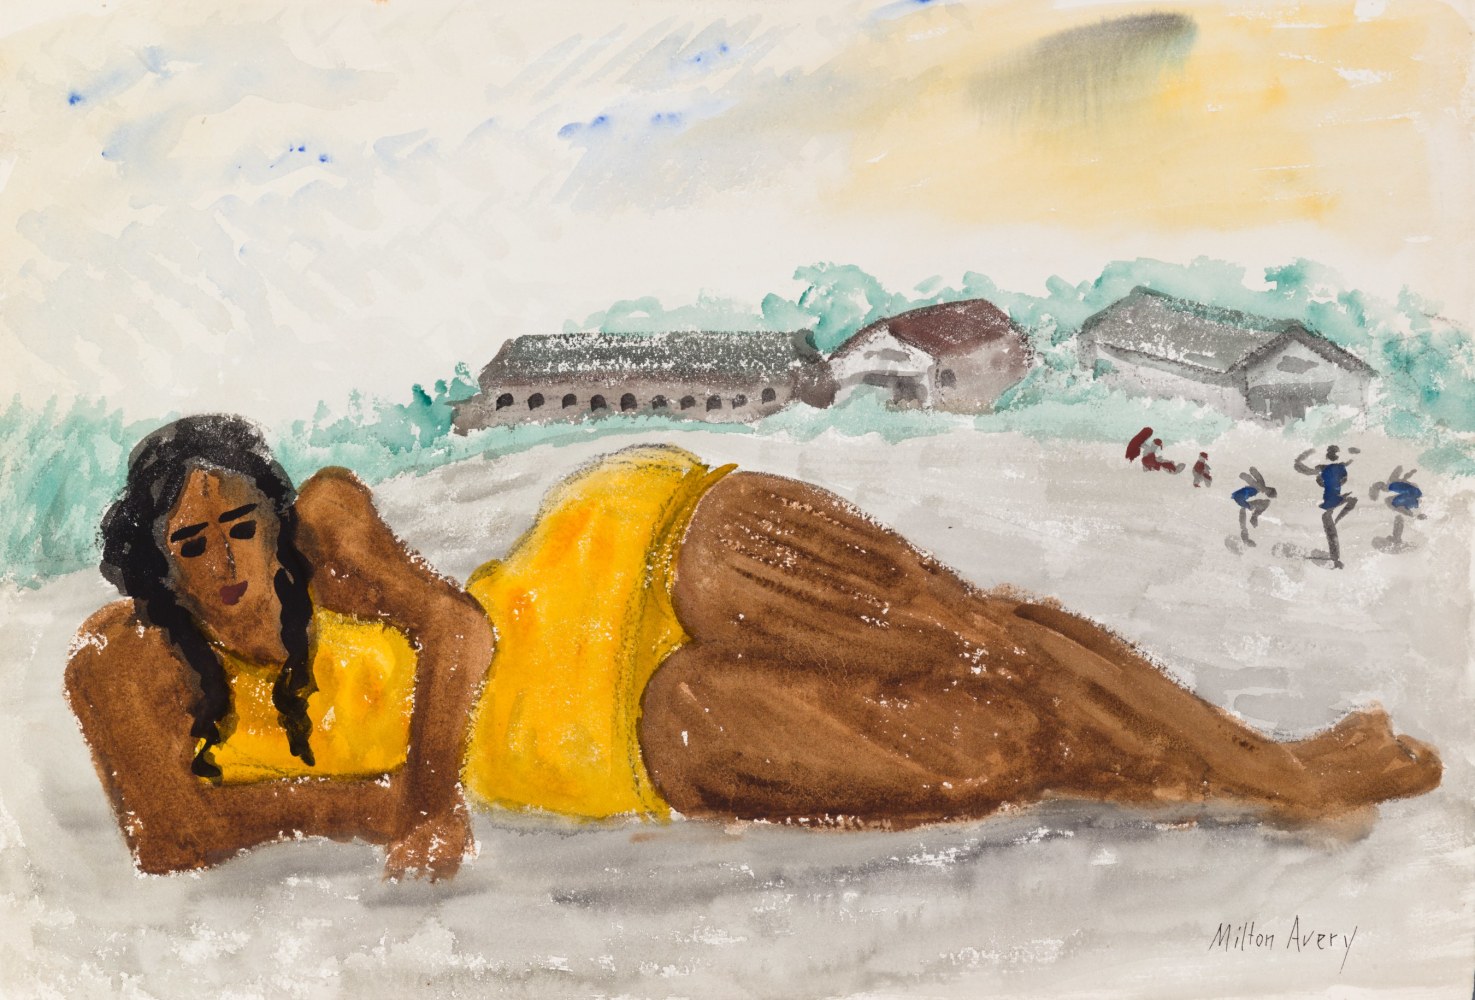 Untitled (Yellow Swimsuit)

c. 1930

Watercolor on paper

15 1/4 x 22 inches

38.7 x 55.9cm